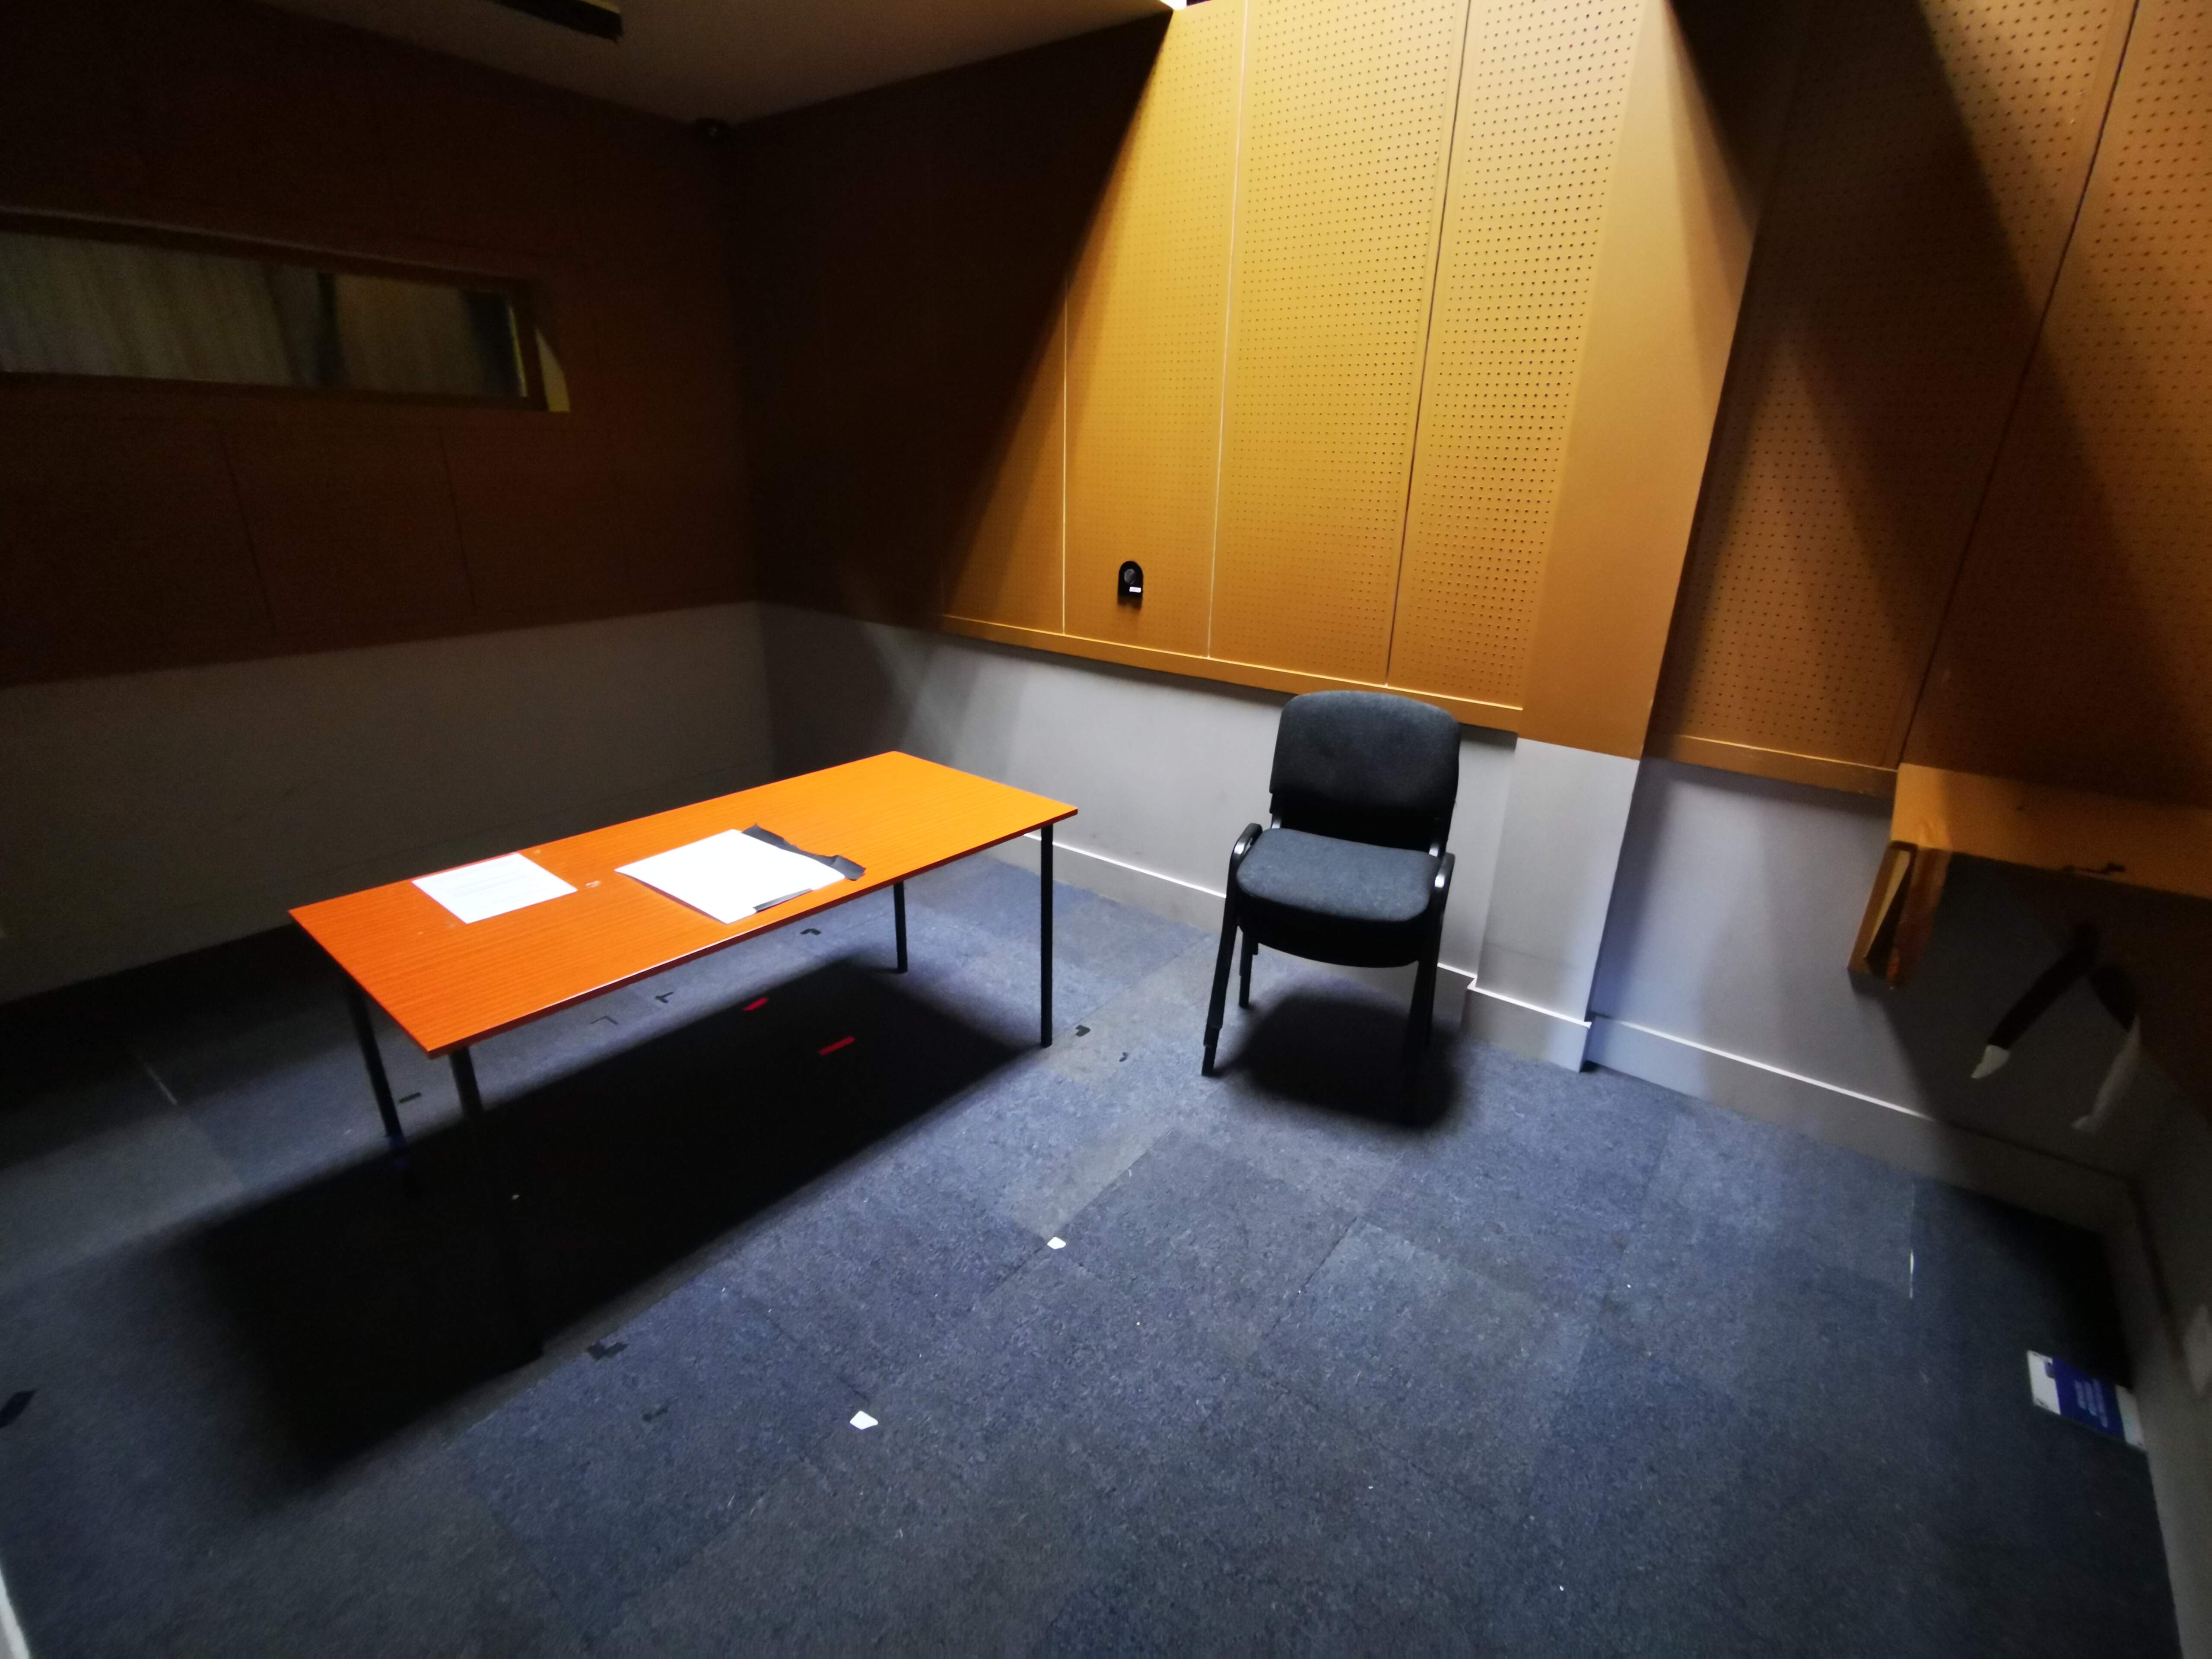 A purpose built interview room - NB fake glass window on top left to allow for shooting into room